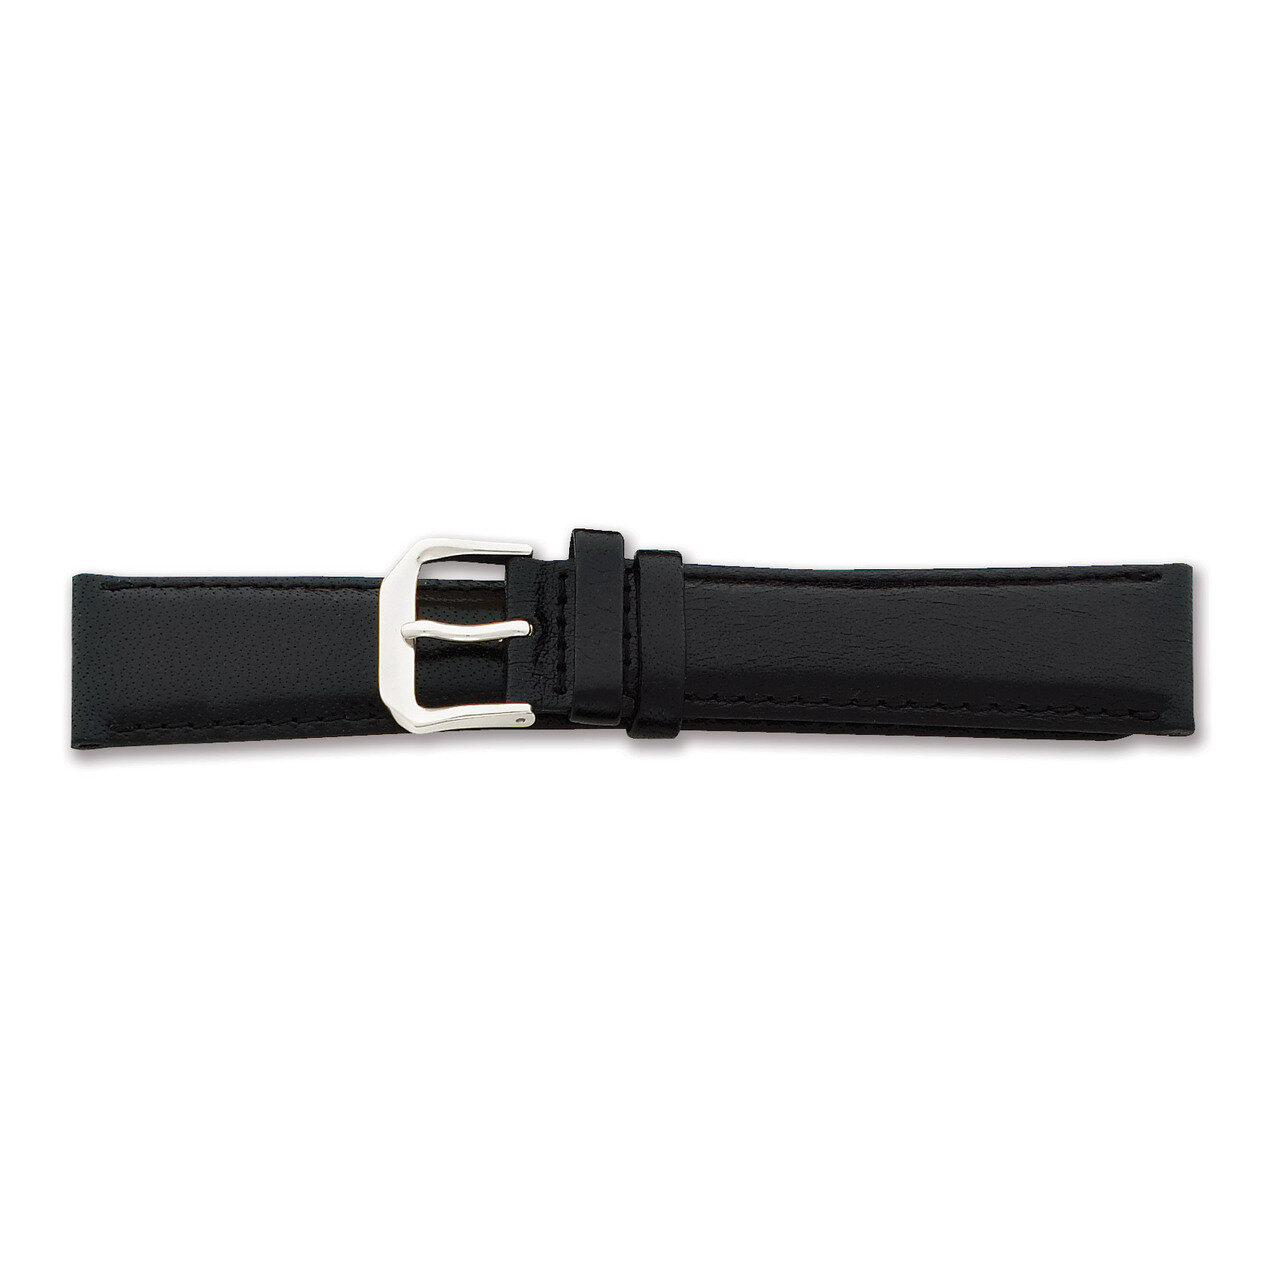 18mm Short Black Smooth Leather Watch Band 6.75 Inch Silver-tone Buckle BAW8S-18